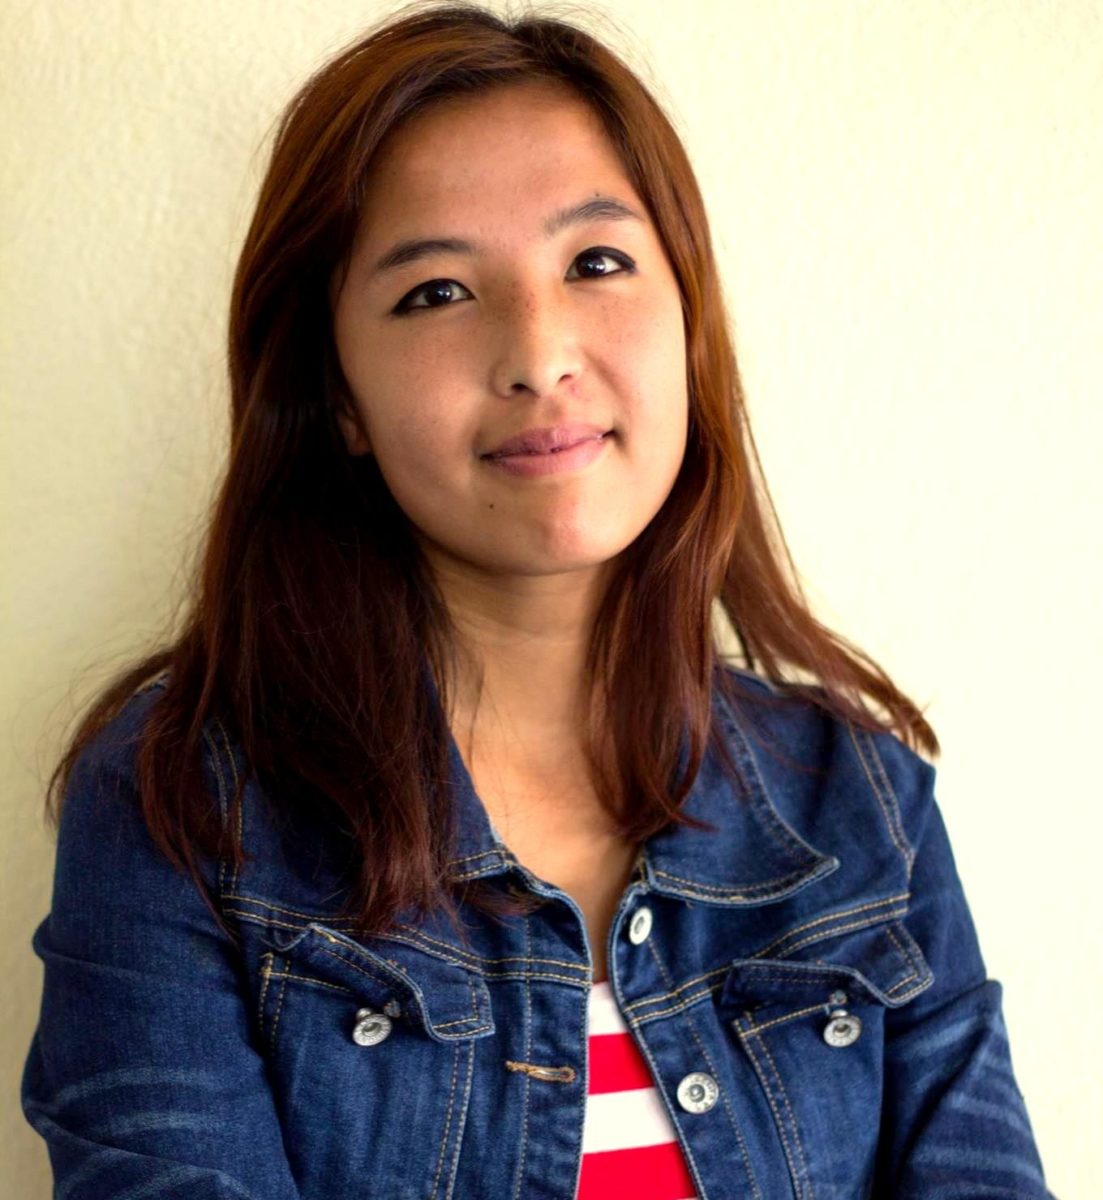 “Practice, Patience and Hard Work to enter into the World of Logic” says Ms. Rojina Bajracharya, Co-Founder of Girls in Technology [Interview]